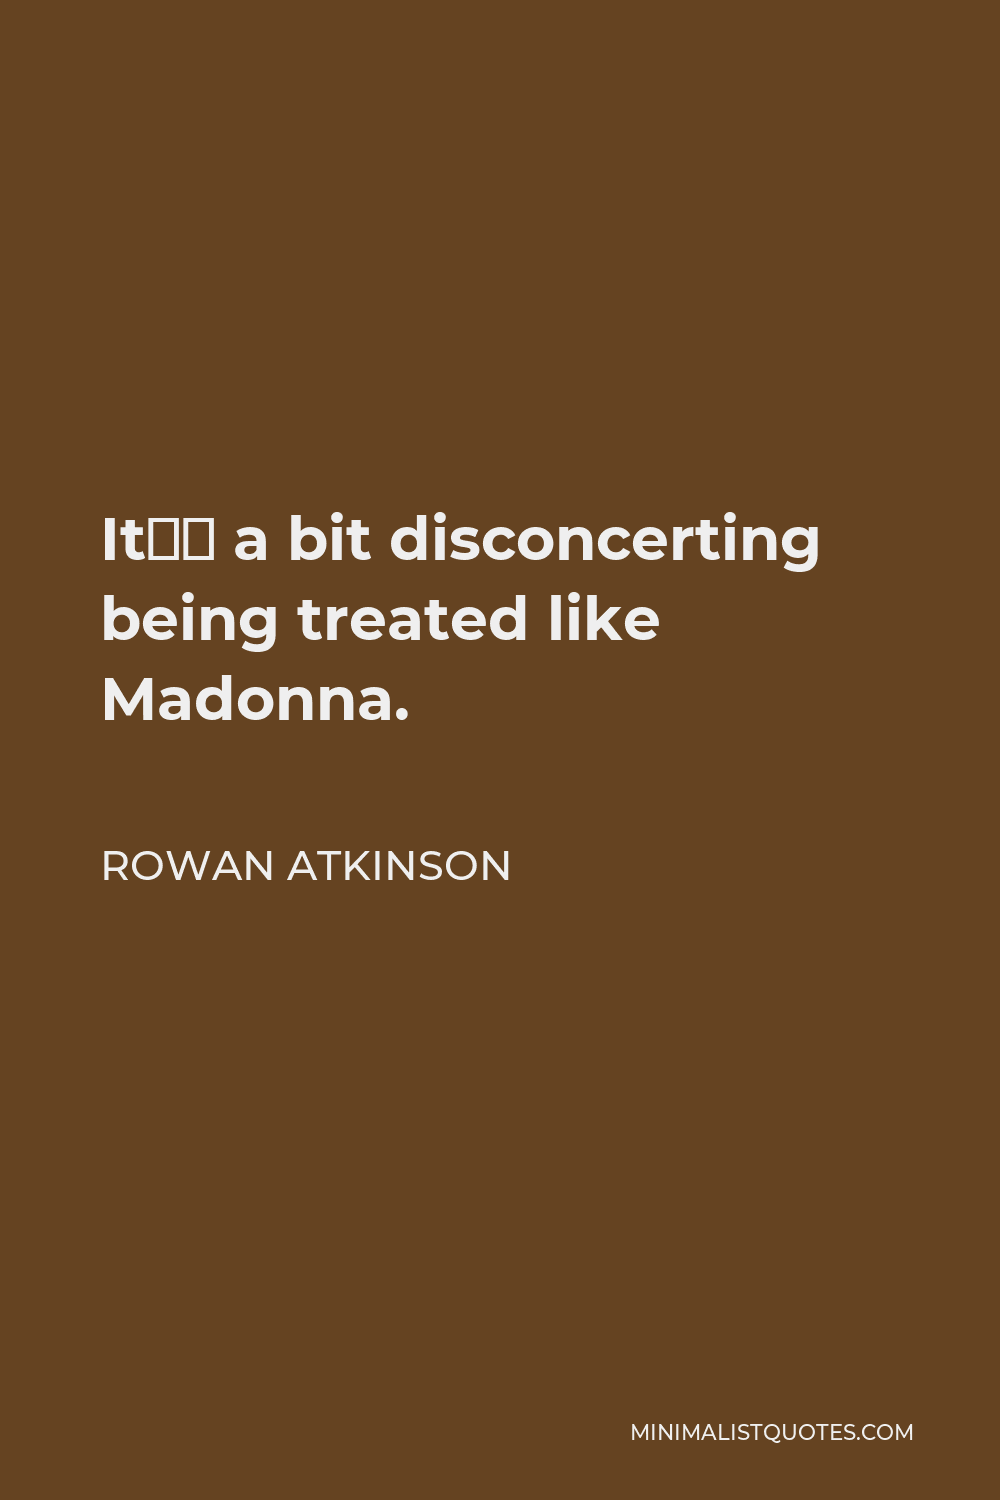 Rowan Atkinson Quote - It’s a bit disconcerting being treated like Madonna.